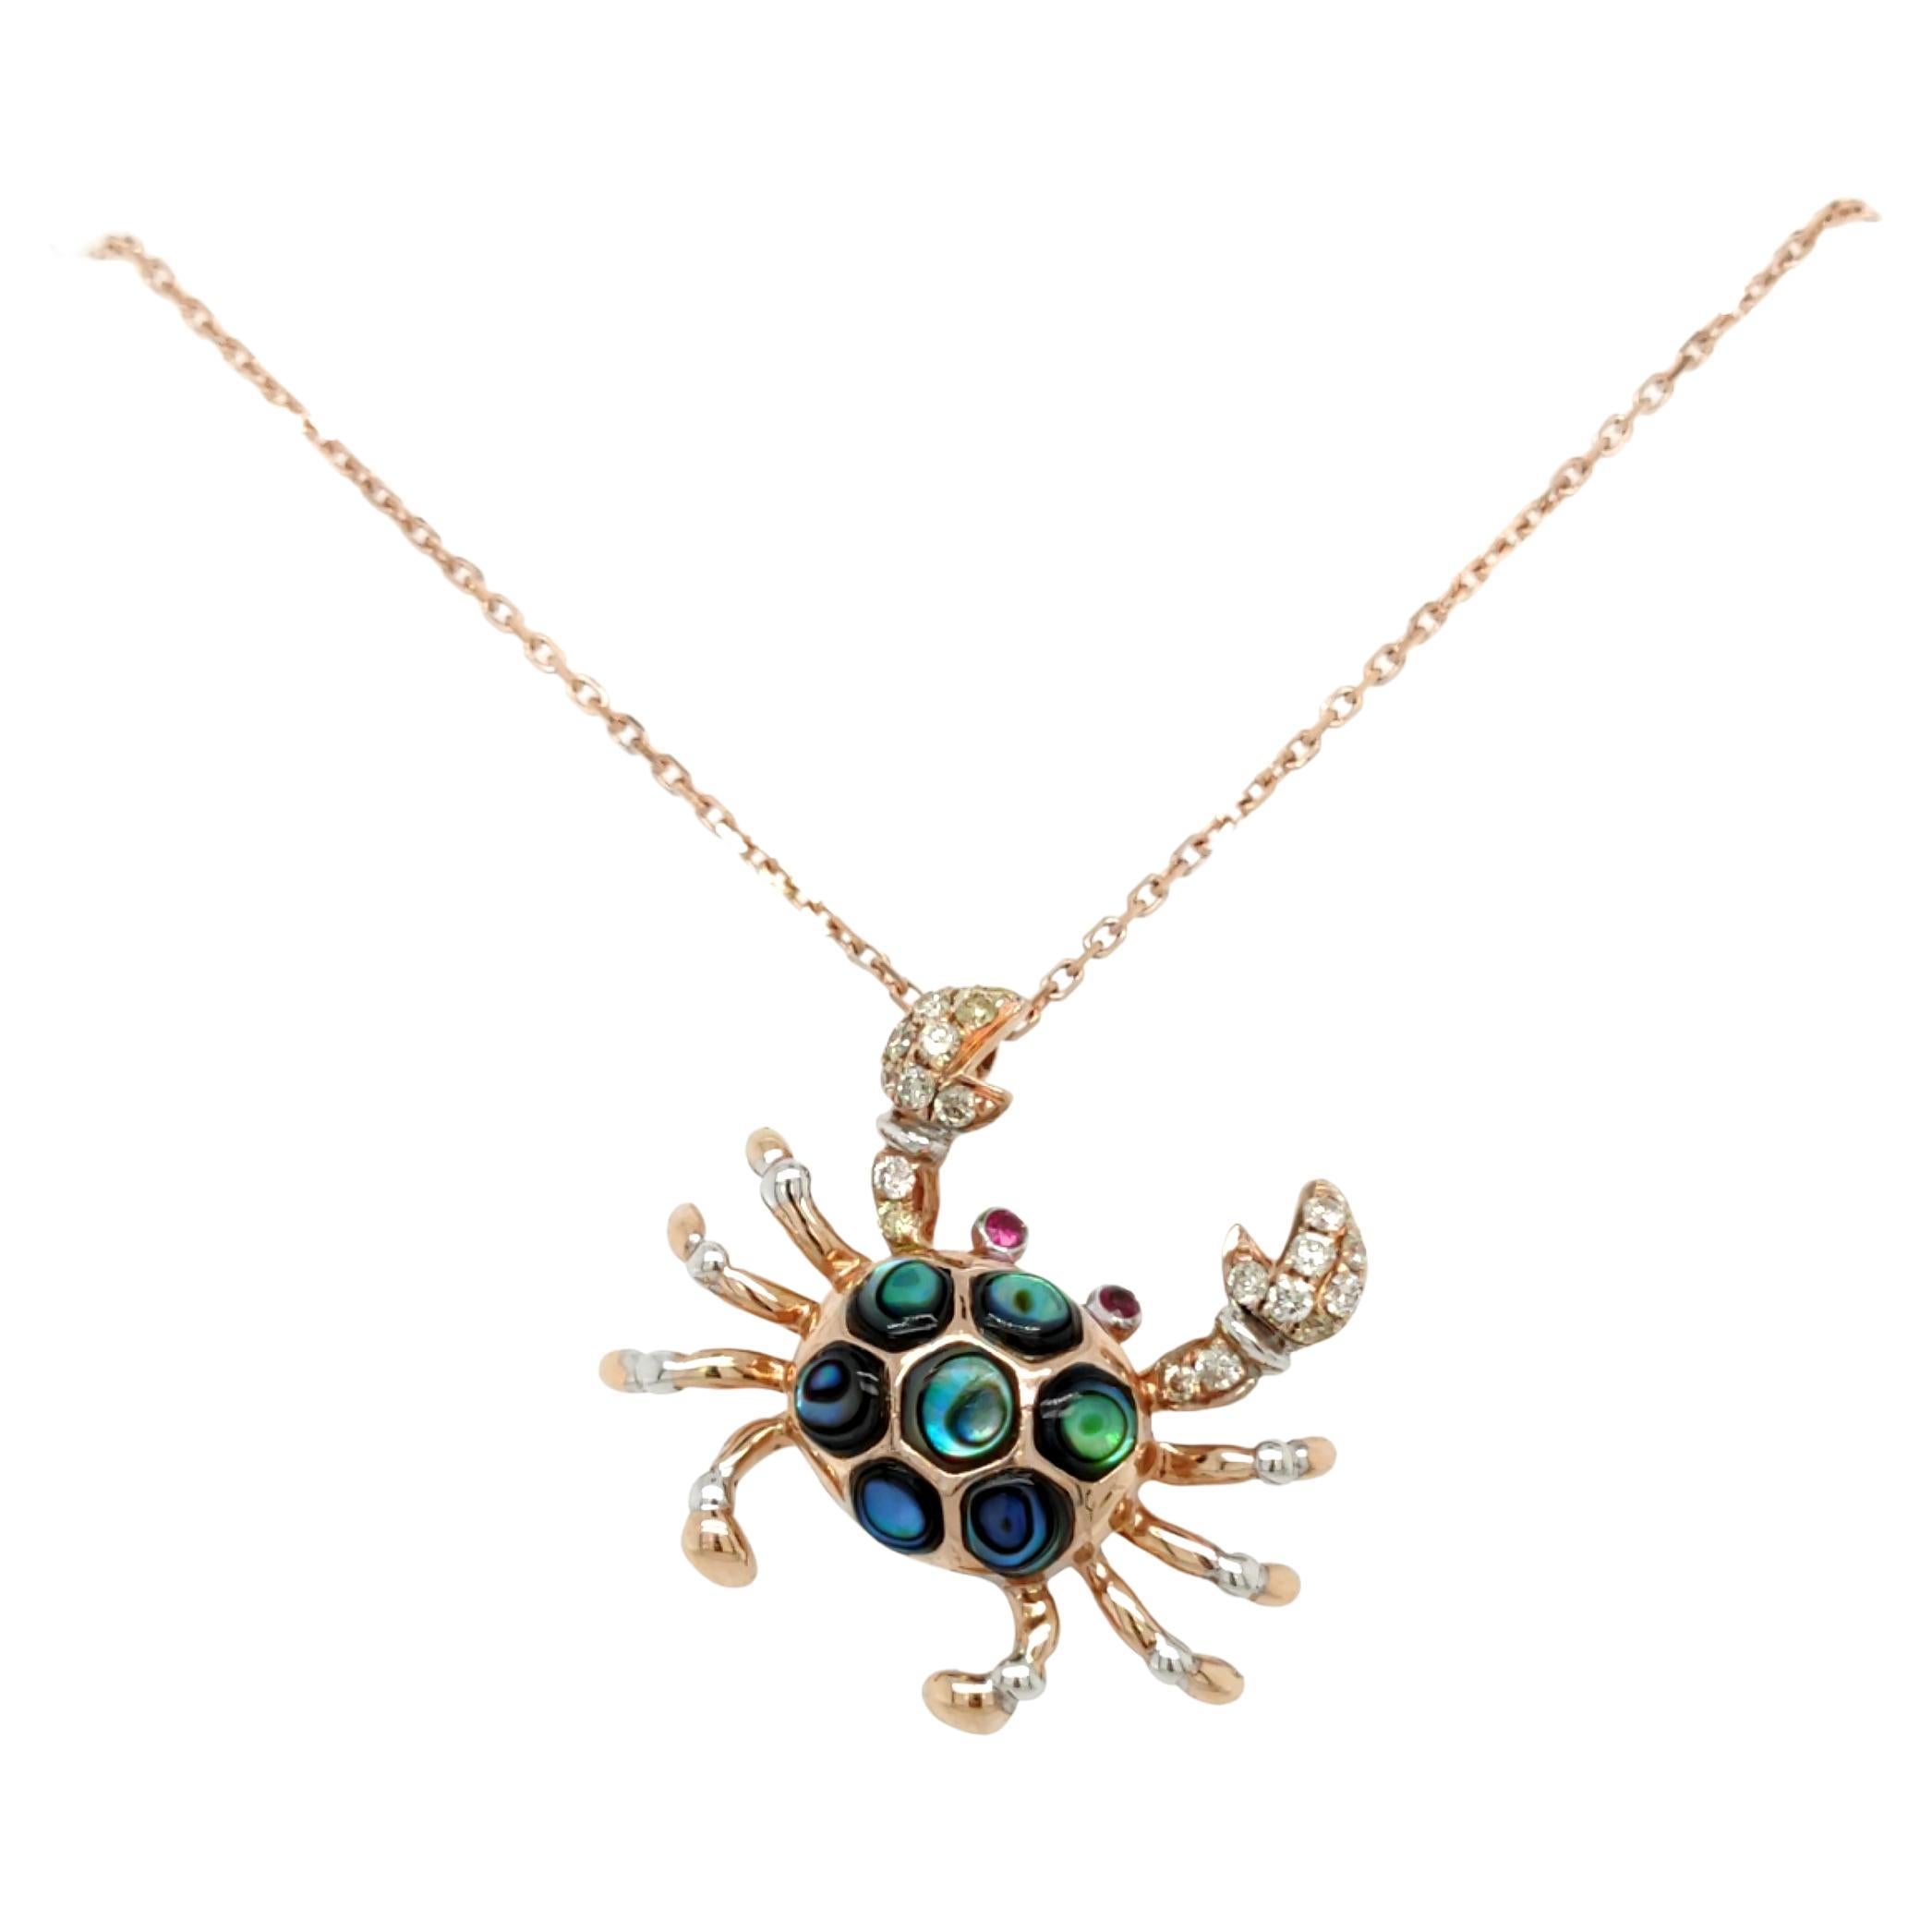 18K Rose Gold Crab Diamond Pendant Necklace with Rubies and Abalone Shell 